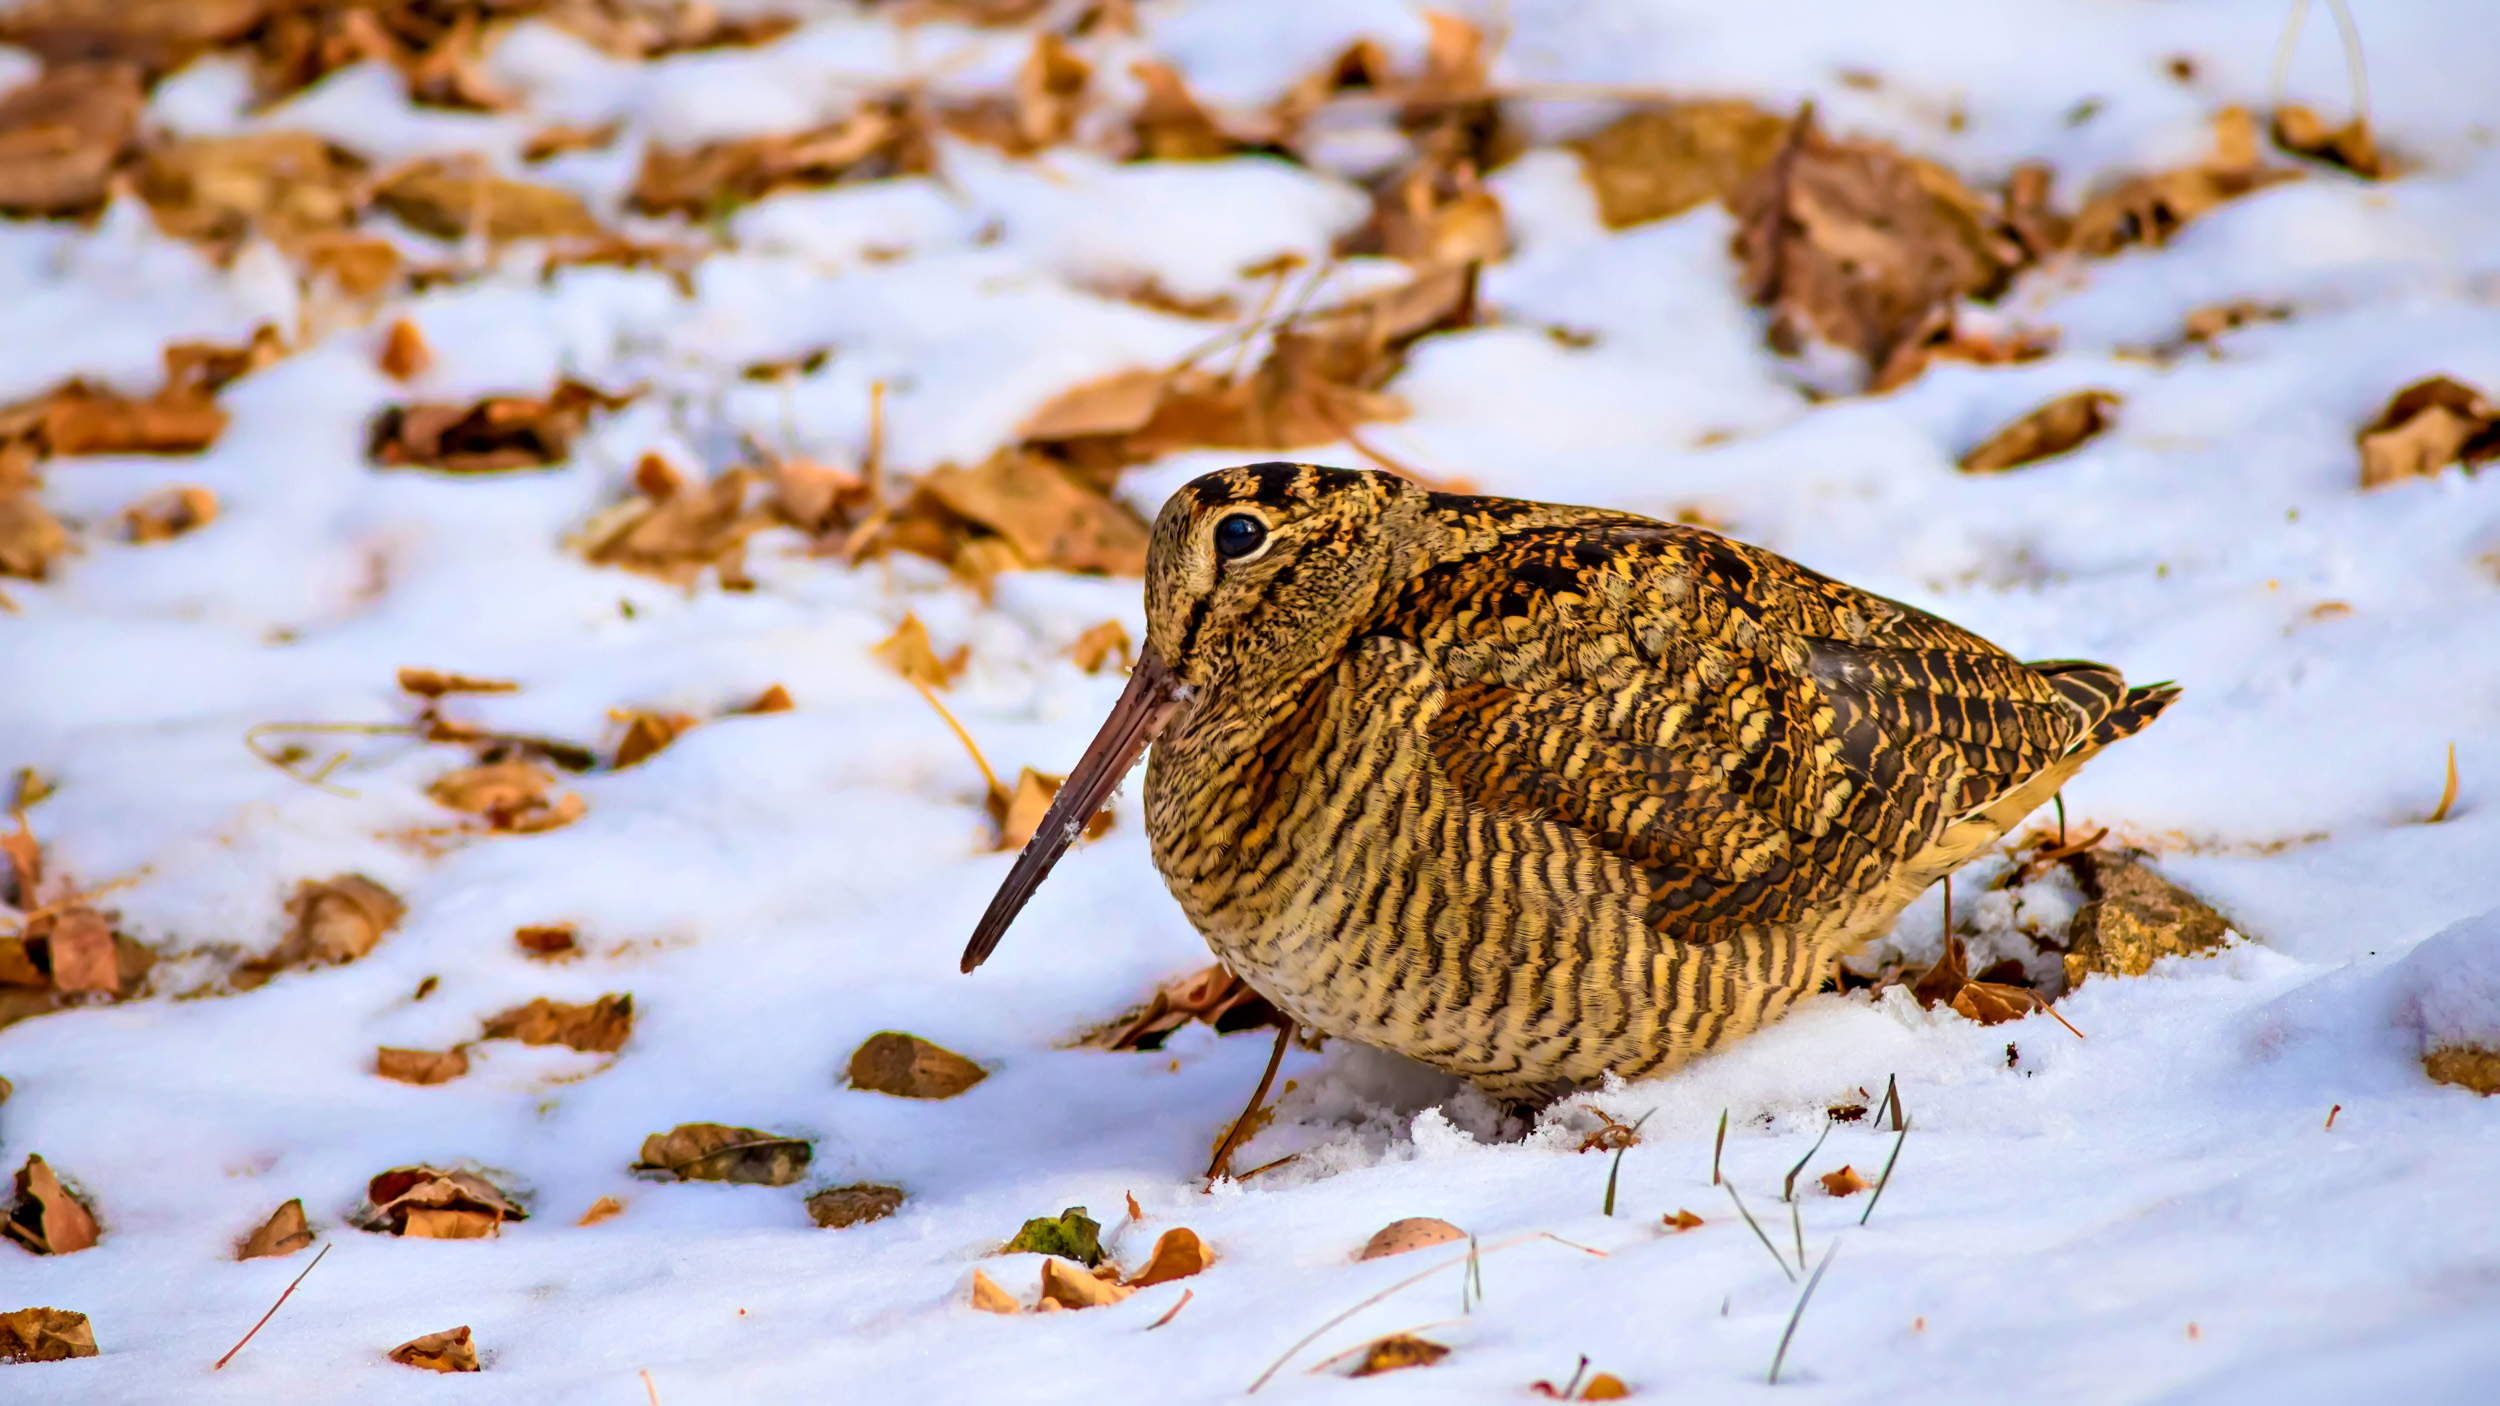 A lone Woodcock perched in the snow surrounded by dried yellow and brown leaves.